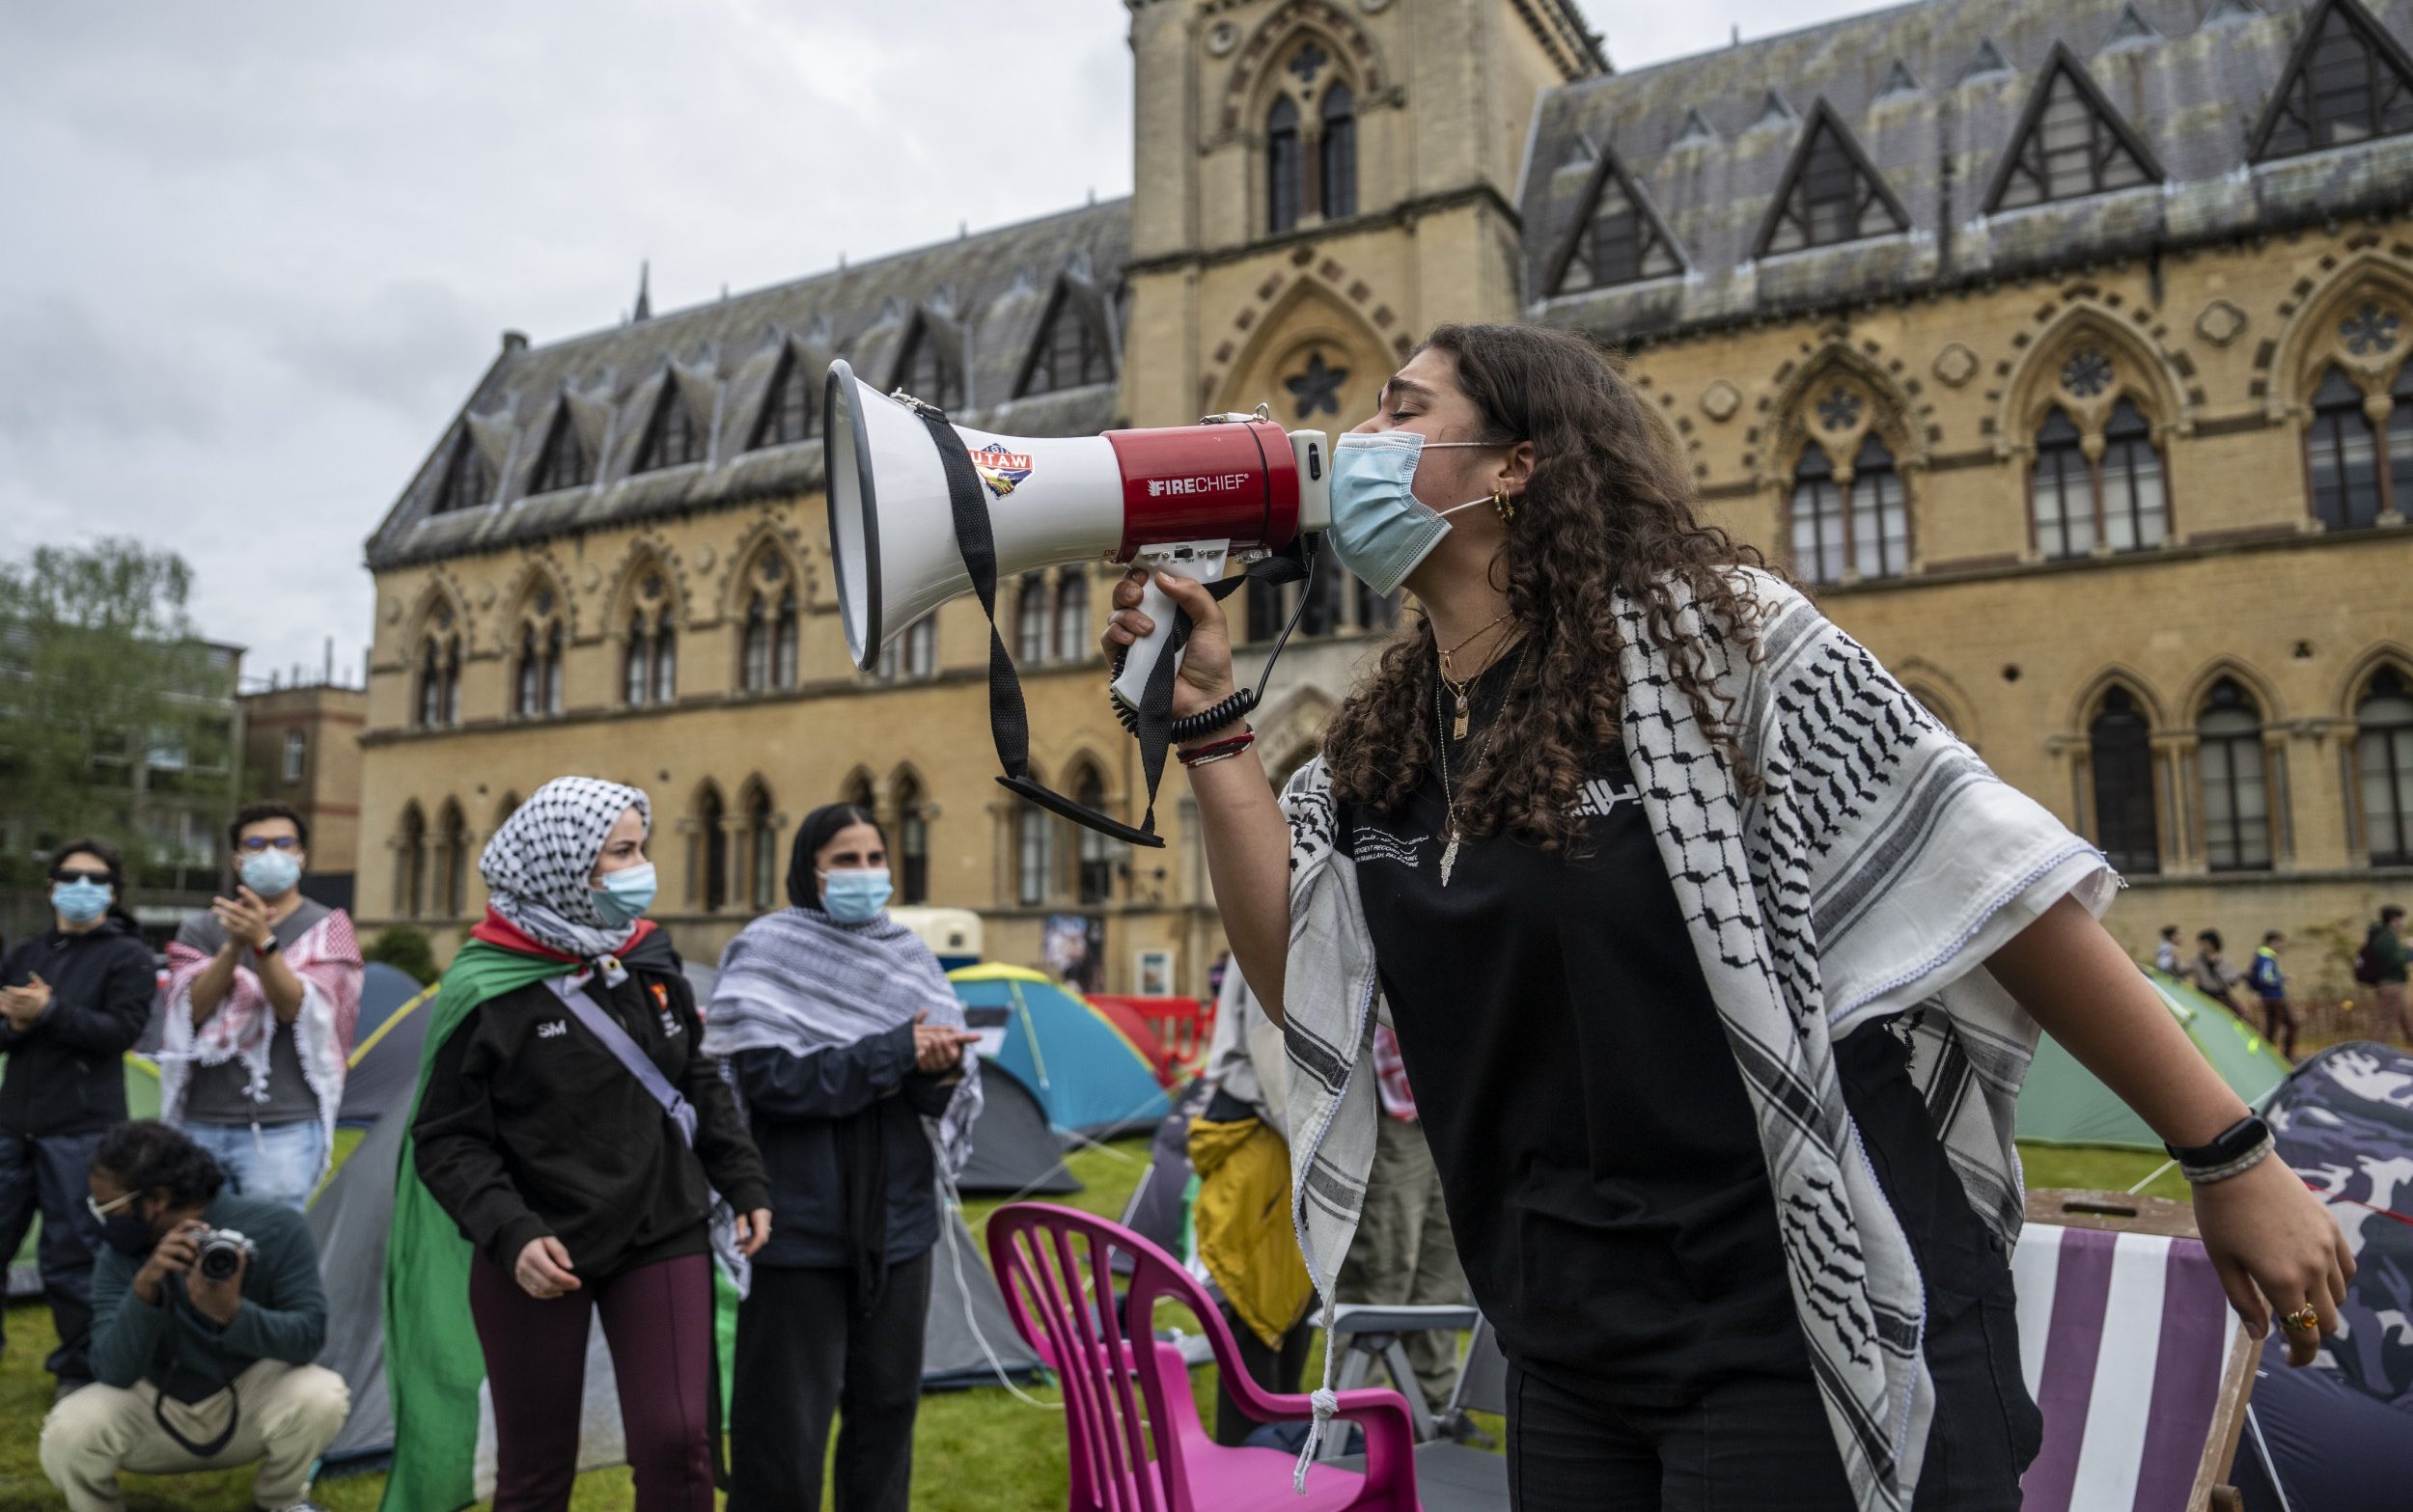 watch: israeli flag ripped from hands of jewish student at cambridge pro-palestine protest